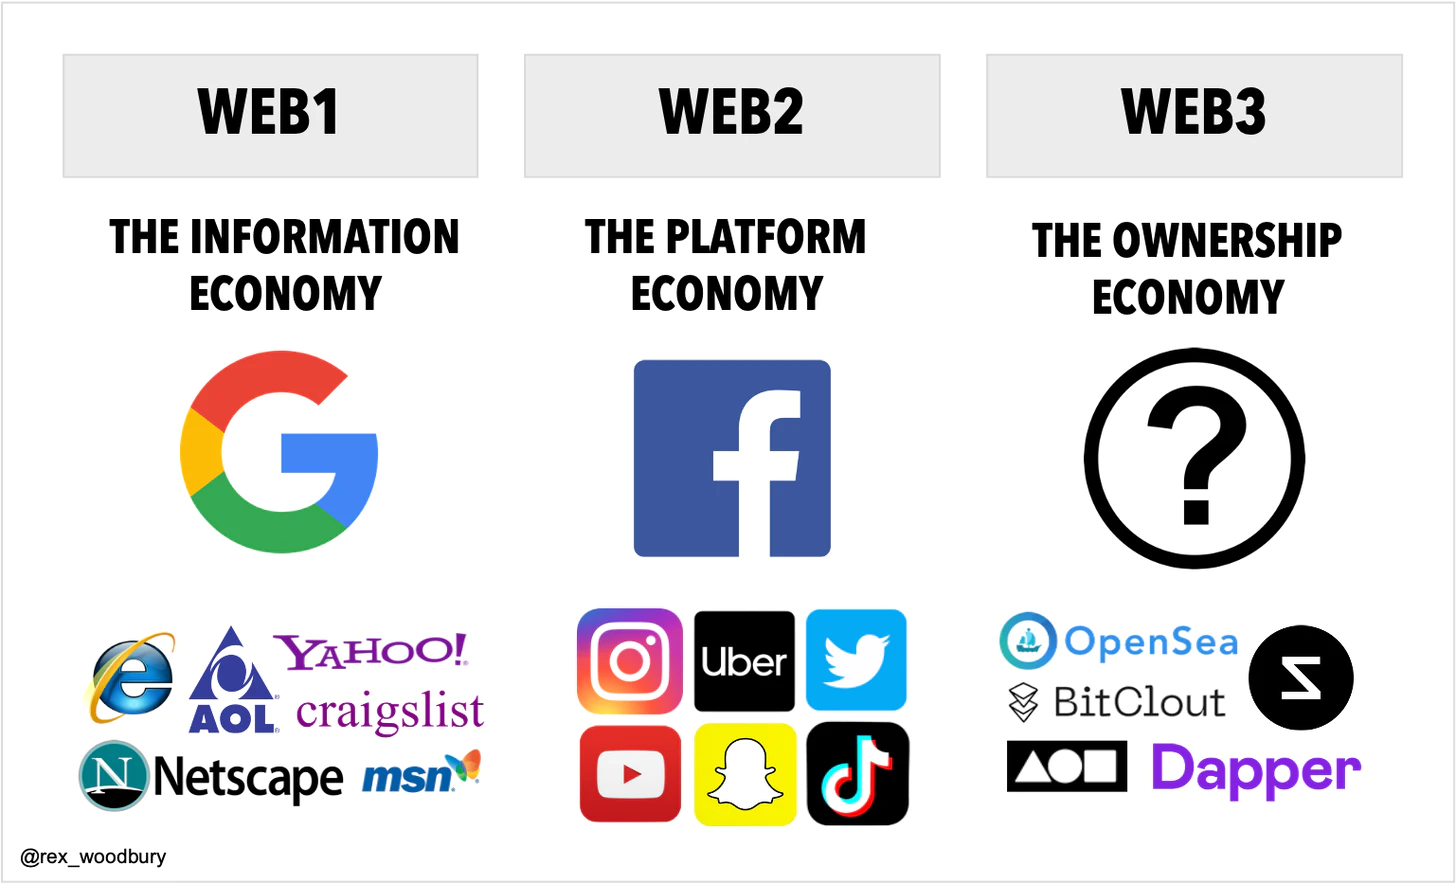 Web 1 was the information economy, Web2 is the platform economy, and Web3 will be the ownership economy.